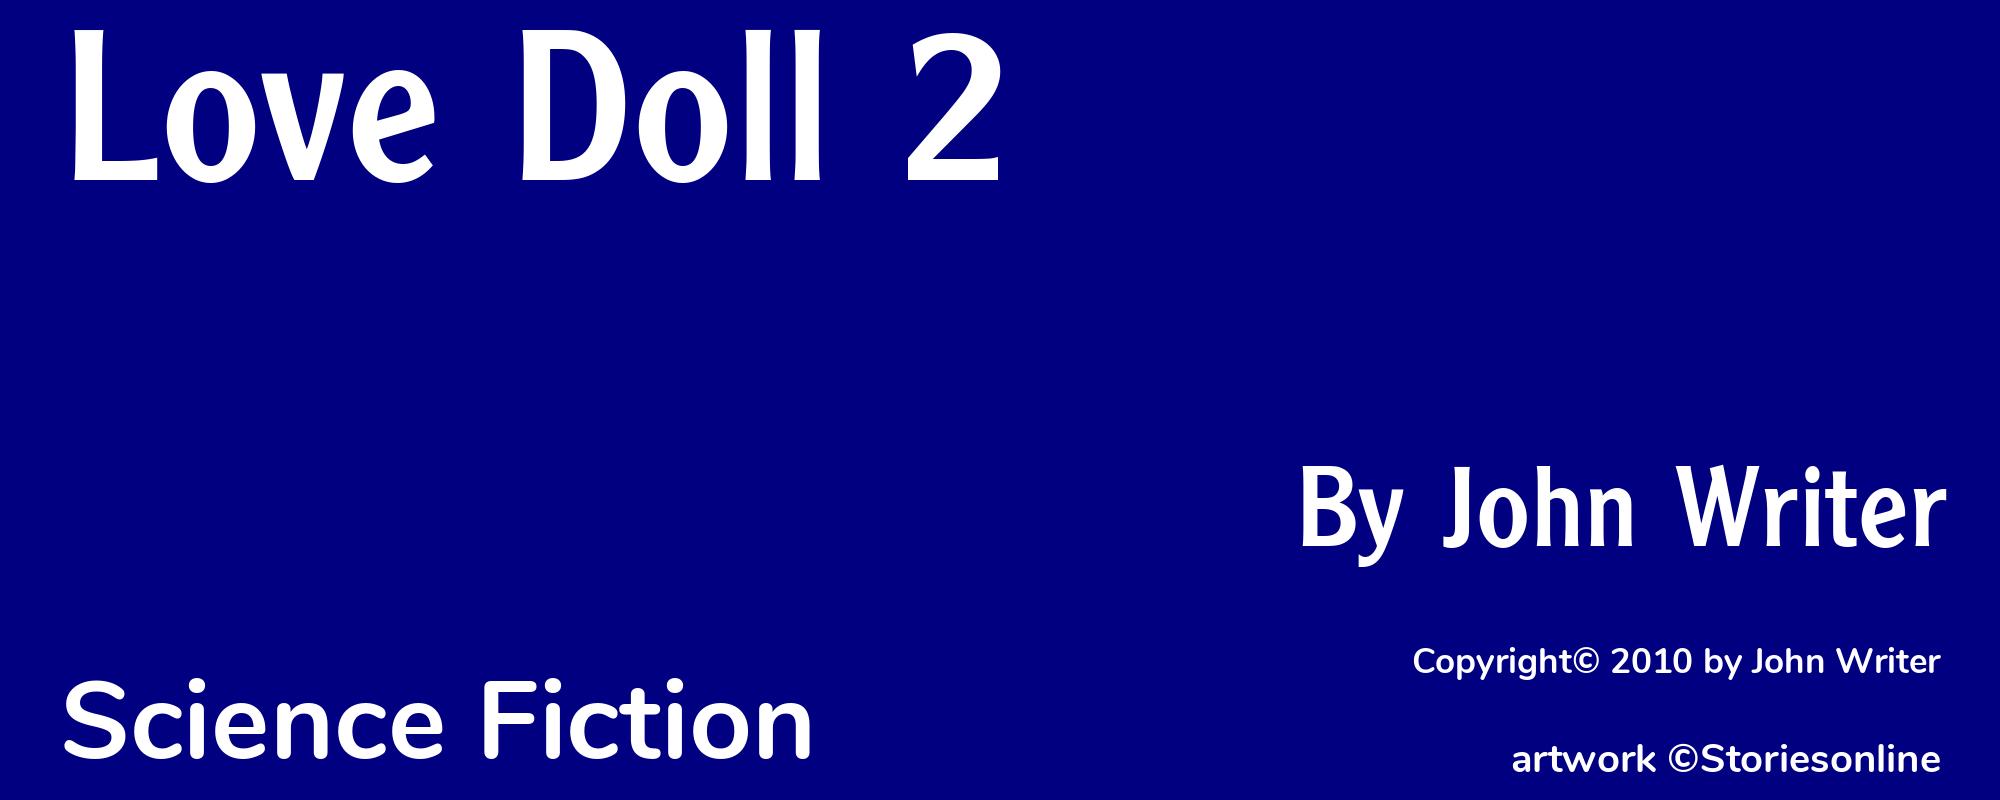 Love Doll 2 - Cover